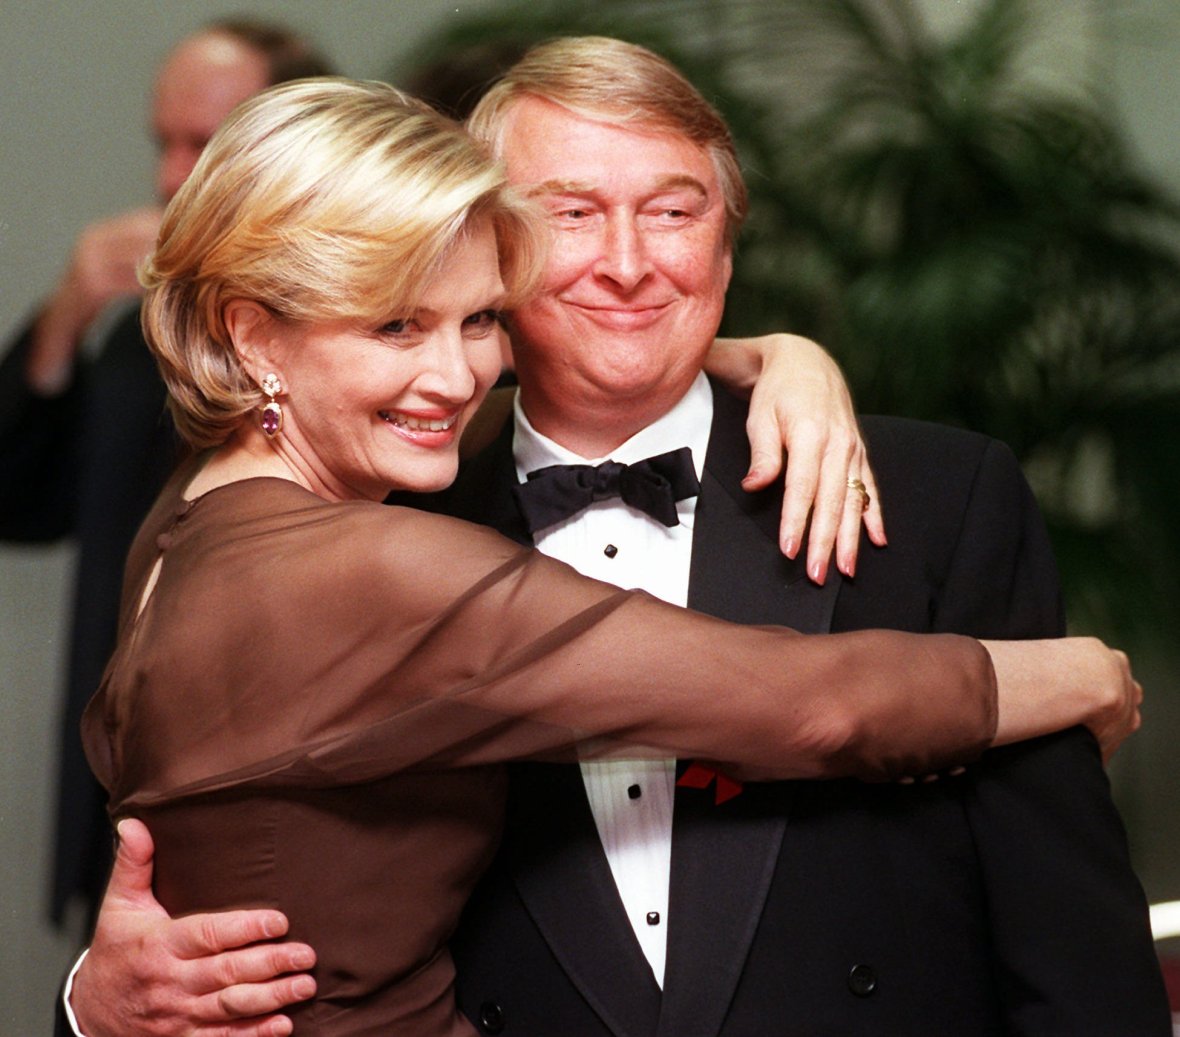 Nichols and television journalist Diane Sawyer, shown above in November 1997, were married for 26 years.